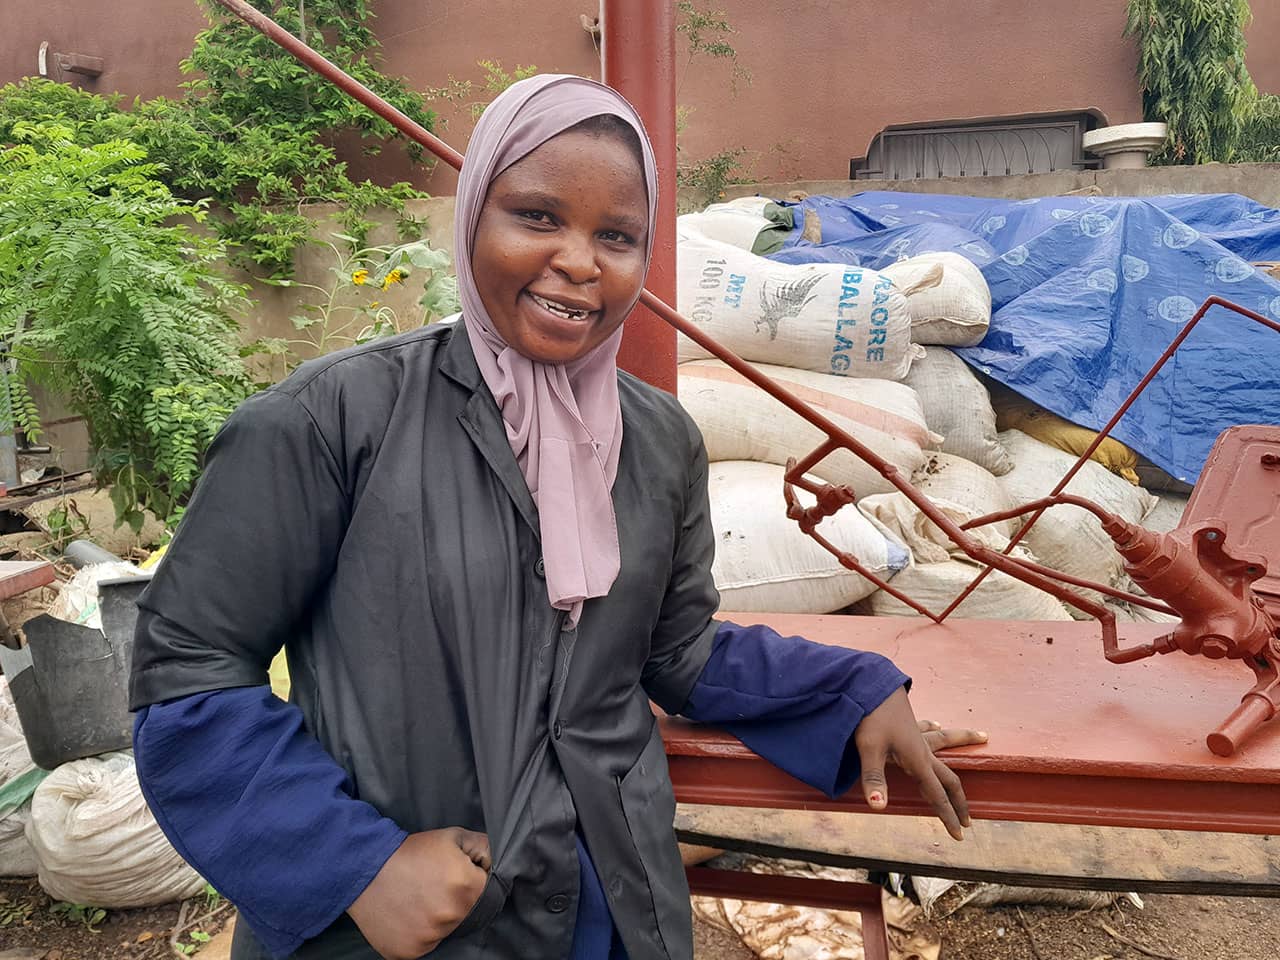 Fatoumata Nikingam (age 29) is pictured with her production
equipment for ecofriendly charcoal in the Ségou region of Mali.